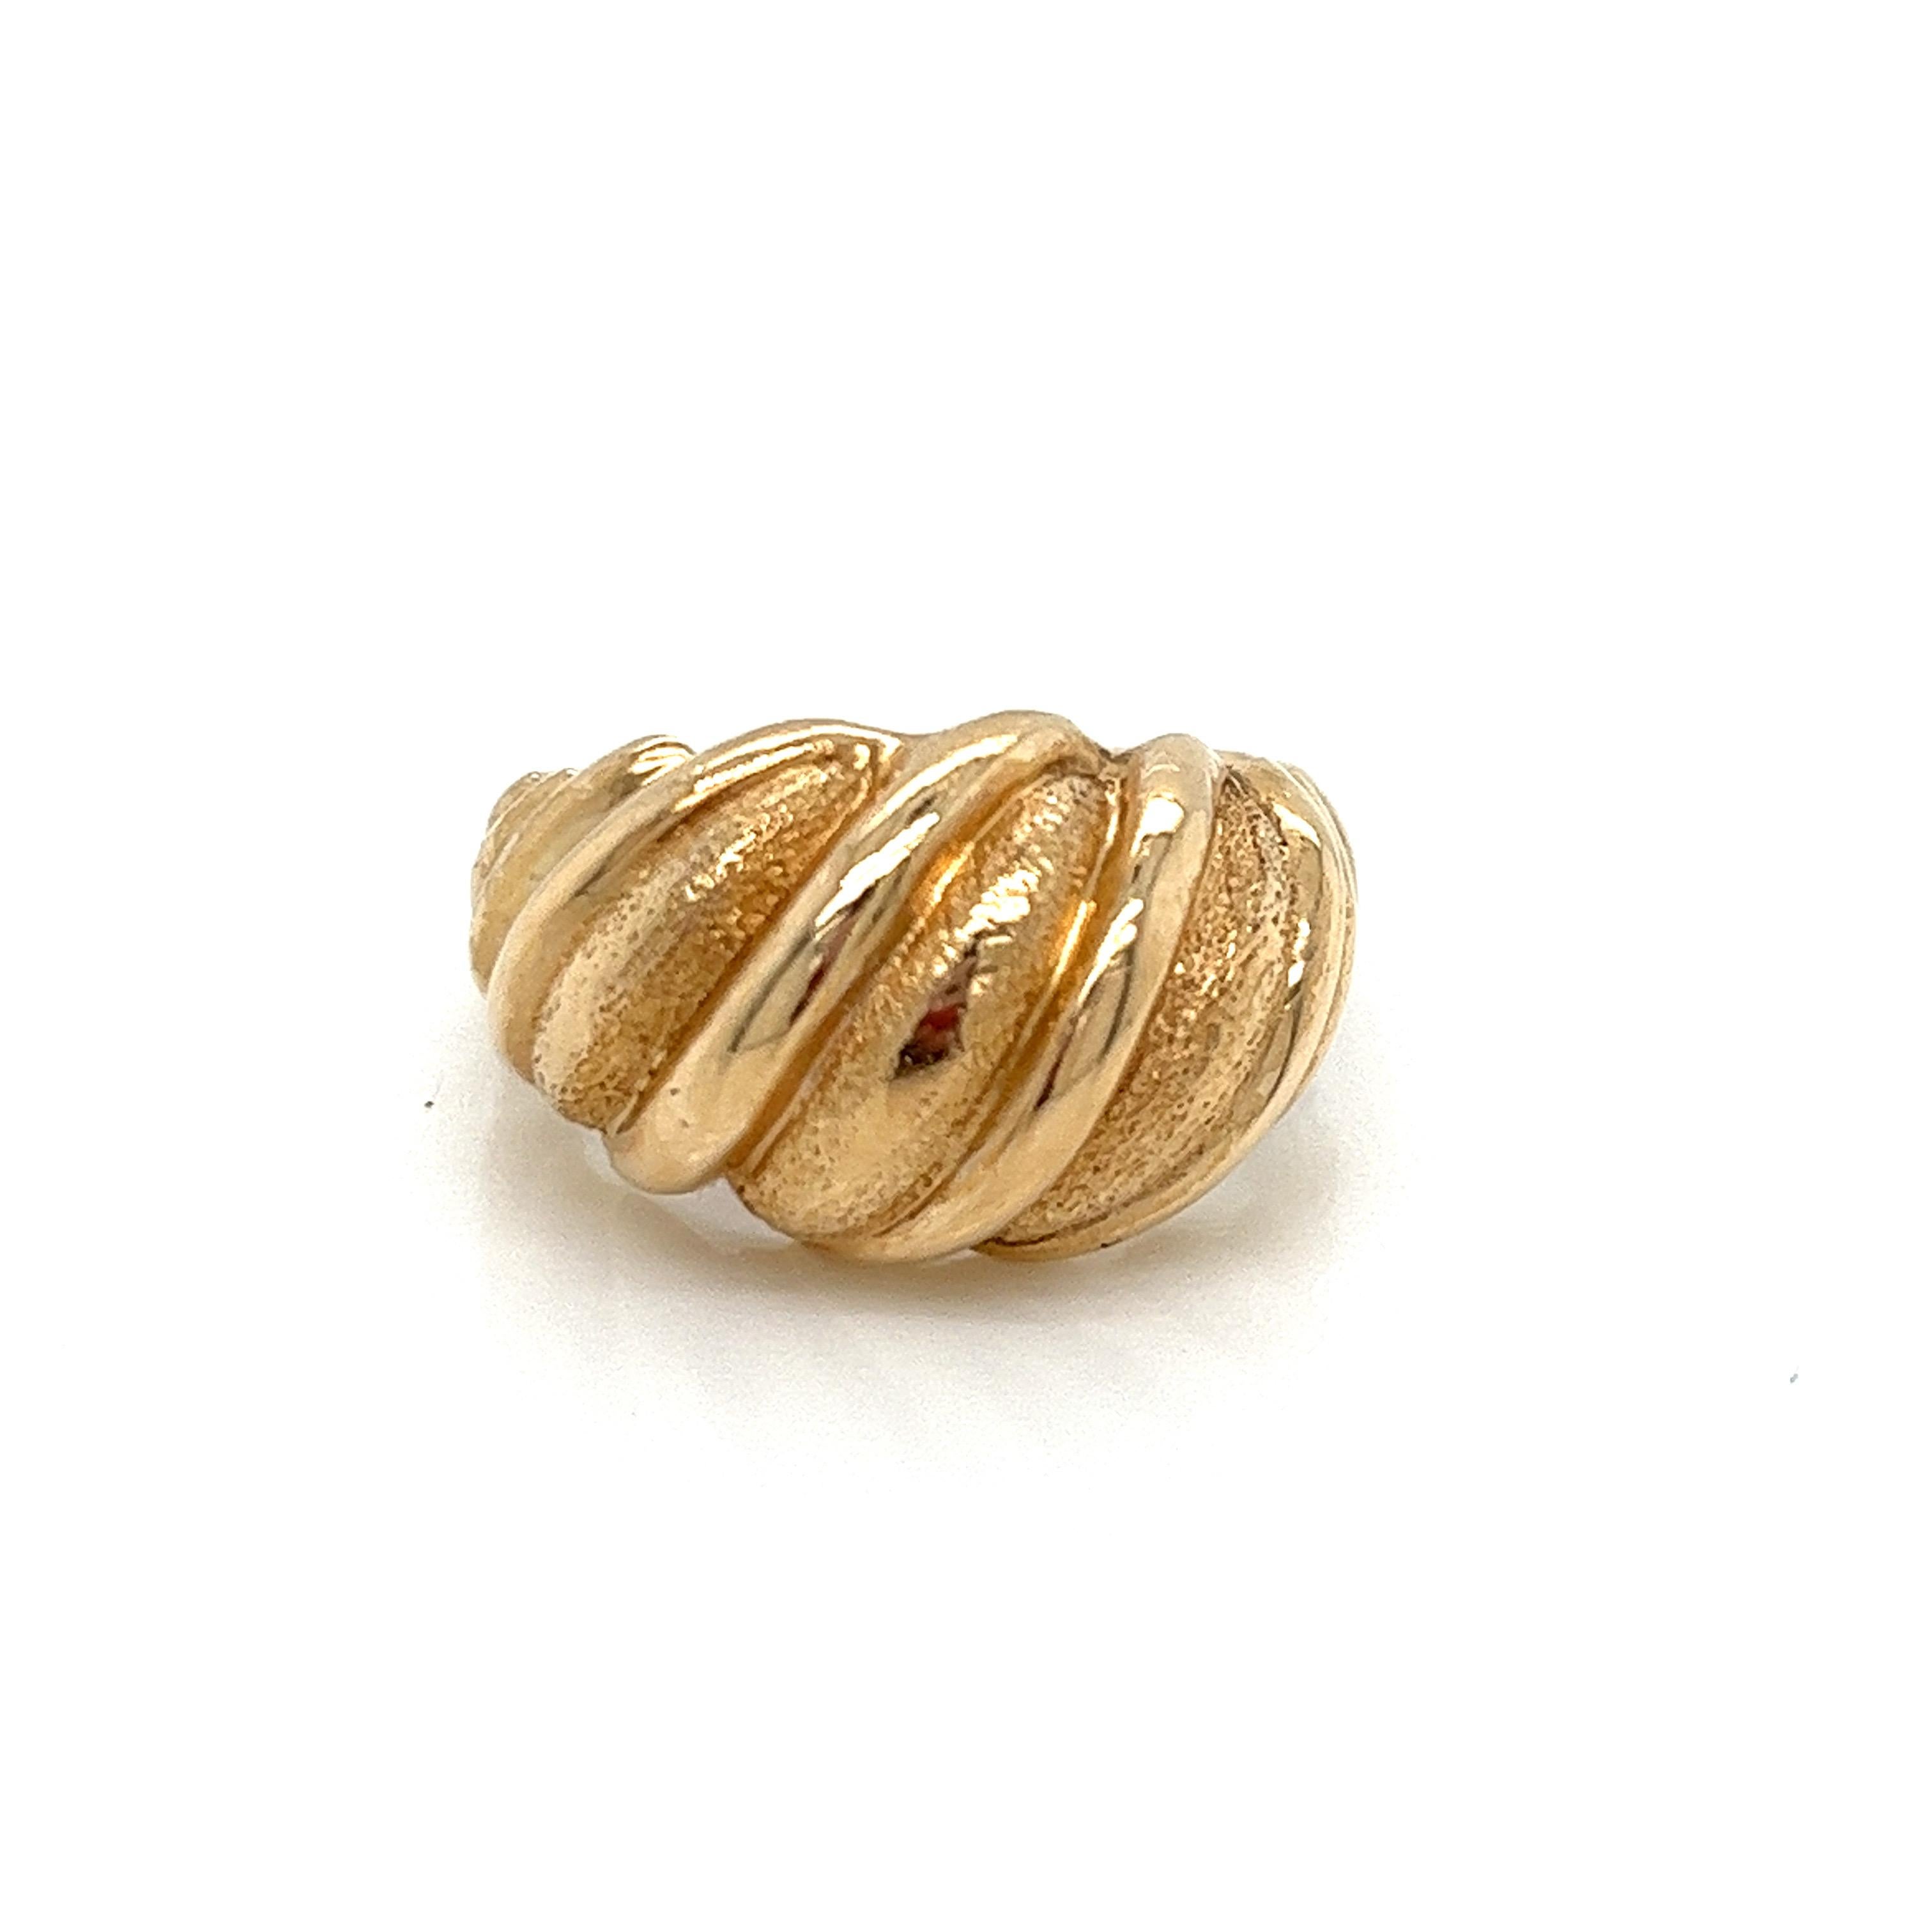 Vintage 1980's 14k Yellow Gold Shrimp Dome Statement Ring. The design is alternating shiny and textured ridges. The ring on top measures 12mm and tapers to 5mm on the side. The height of the ring off the finger is 6mm. The width of the band on the